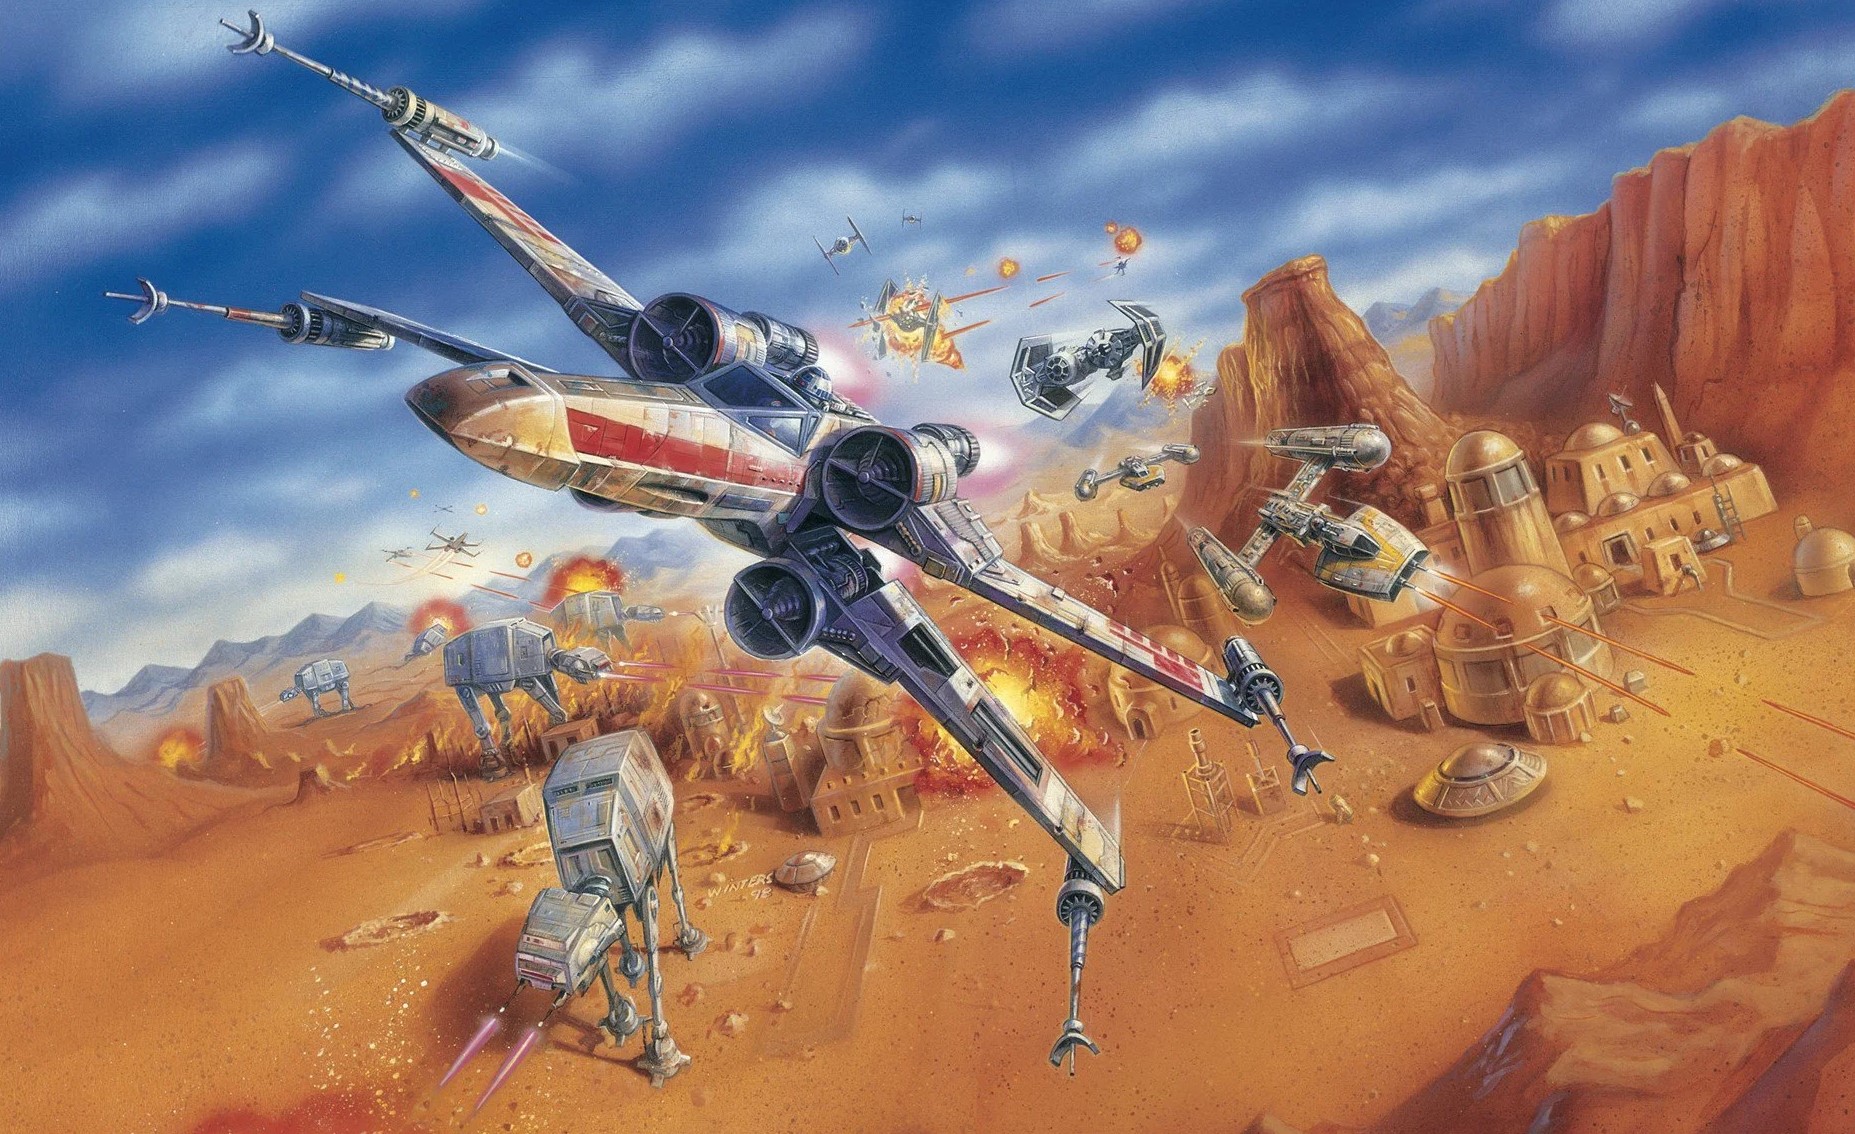 rogue-squadron-might-not-be-the-only-star-wars-movie-in-trouble-due-to-creative-differences